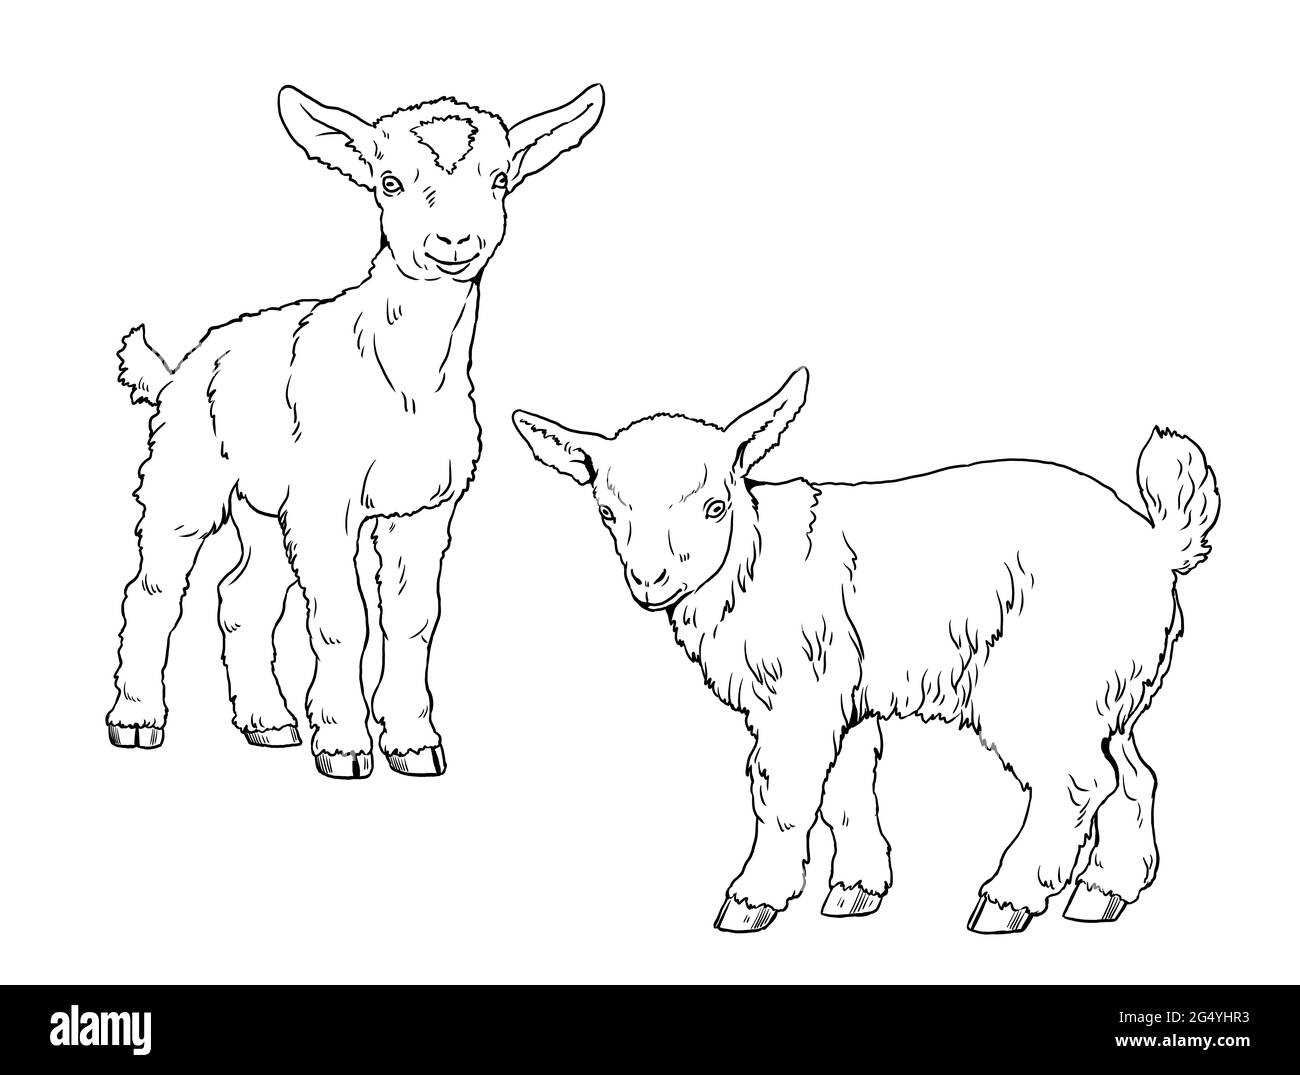 Goatling. Coloring page with domestic animals. Digital drawing with goat. Template for children to paint. Stock Photo